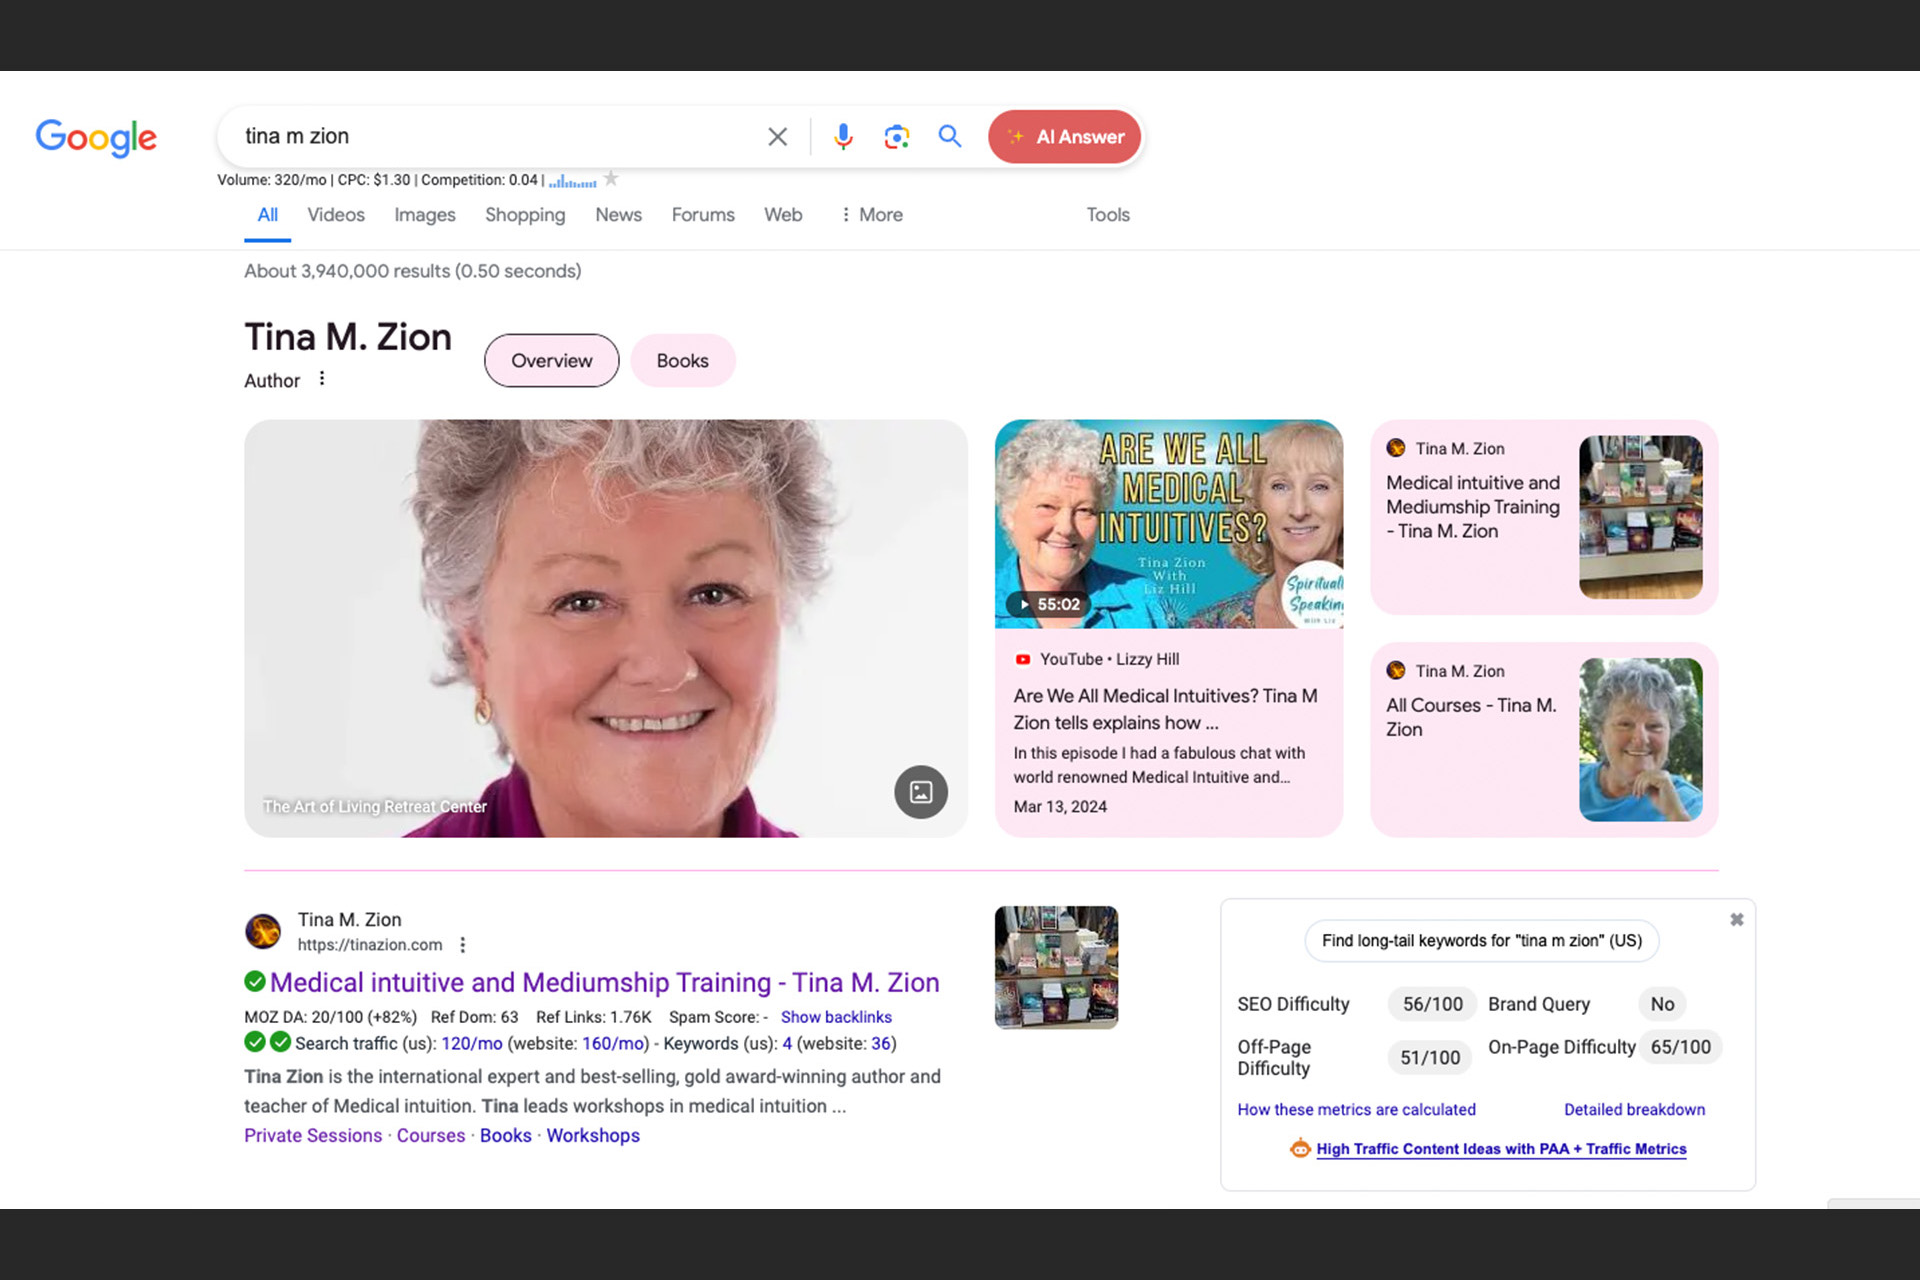 Tina M. Zion Google feature page